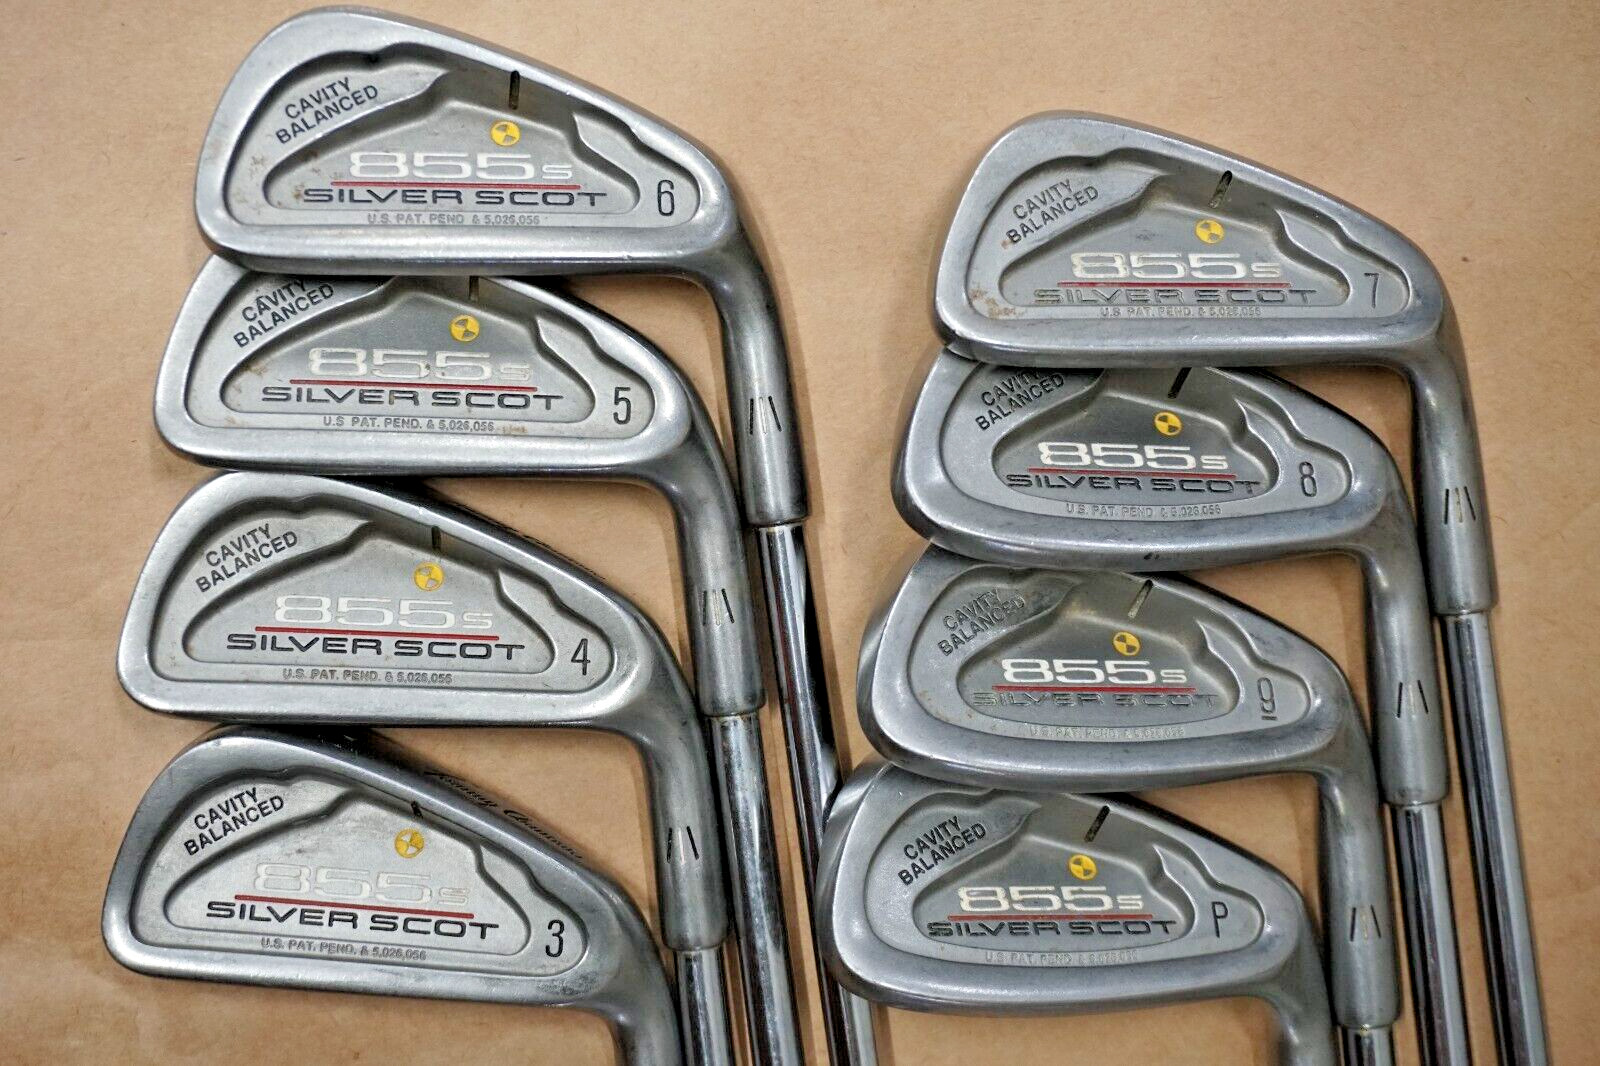 Tommy Armour 855s Silver Scot Iron Set 3,4,5,6,7,8,9,PW, Matched, Steel, Regular